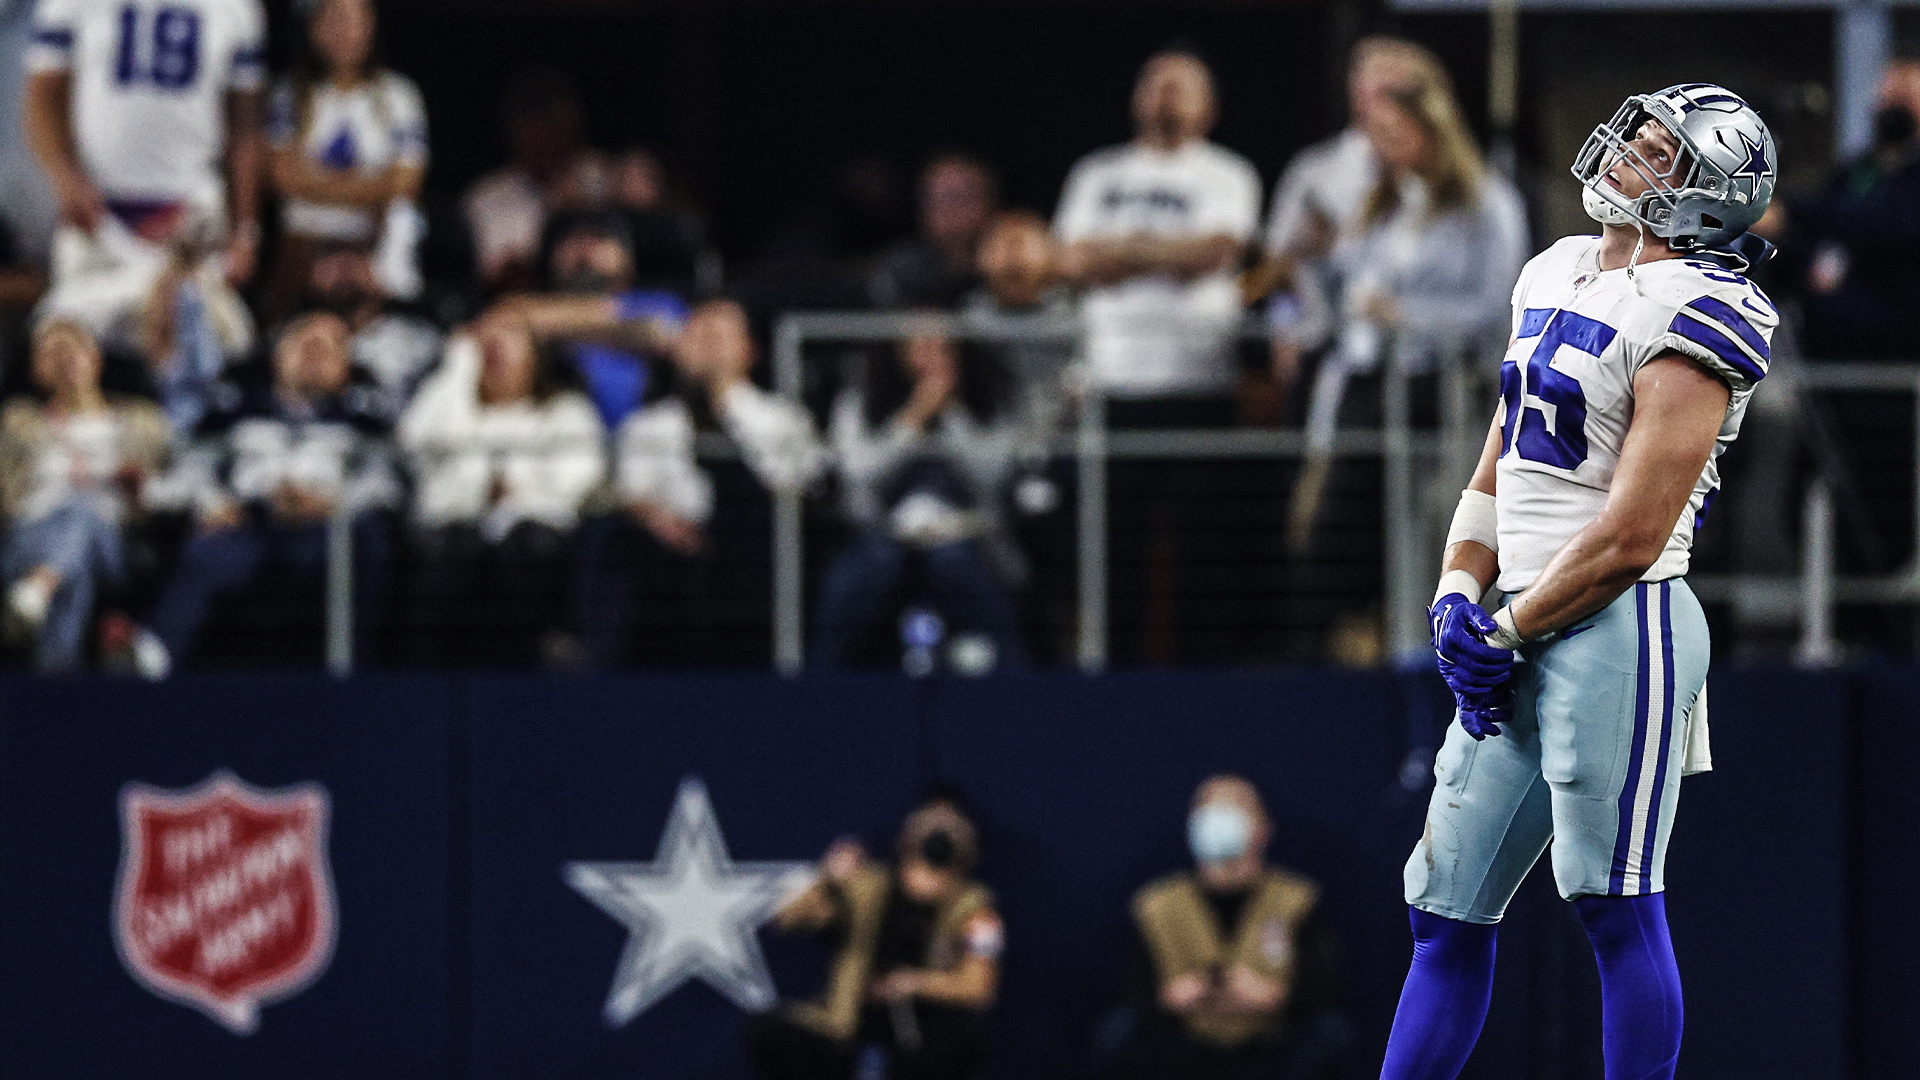 Cowboys doomed by penalties; playoff woes continue with latest loss